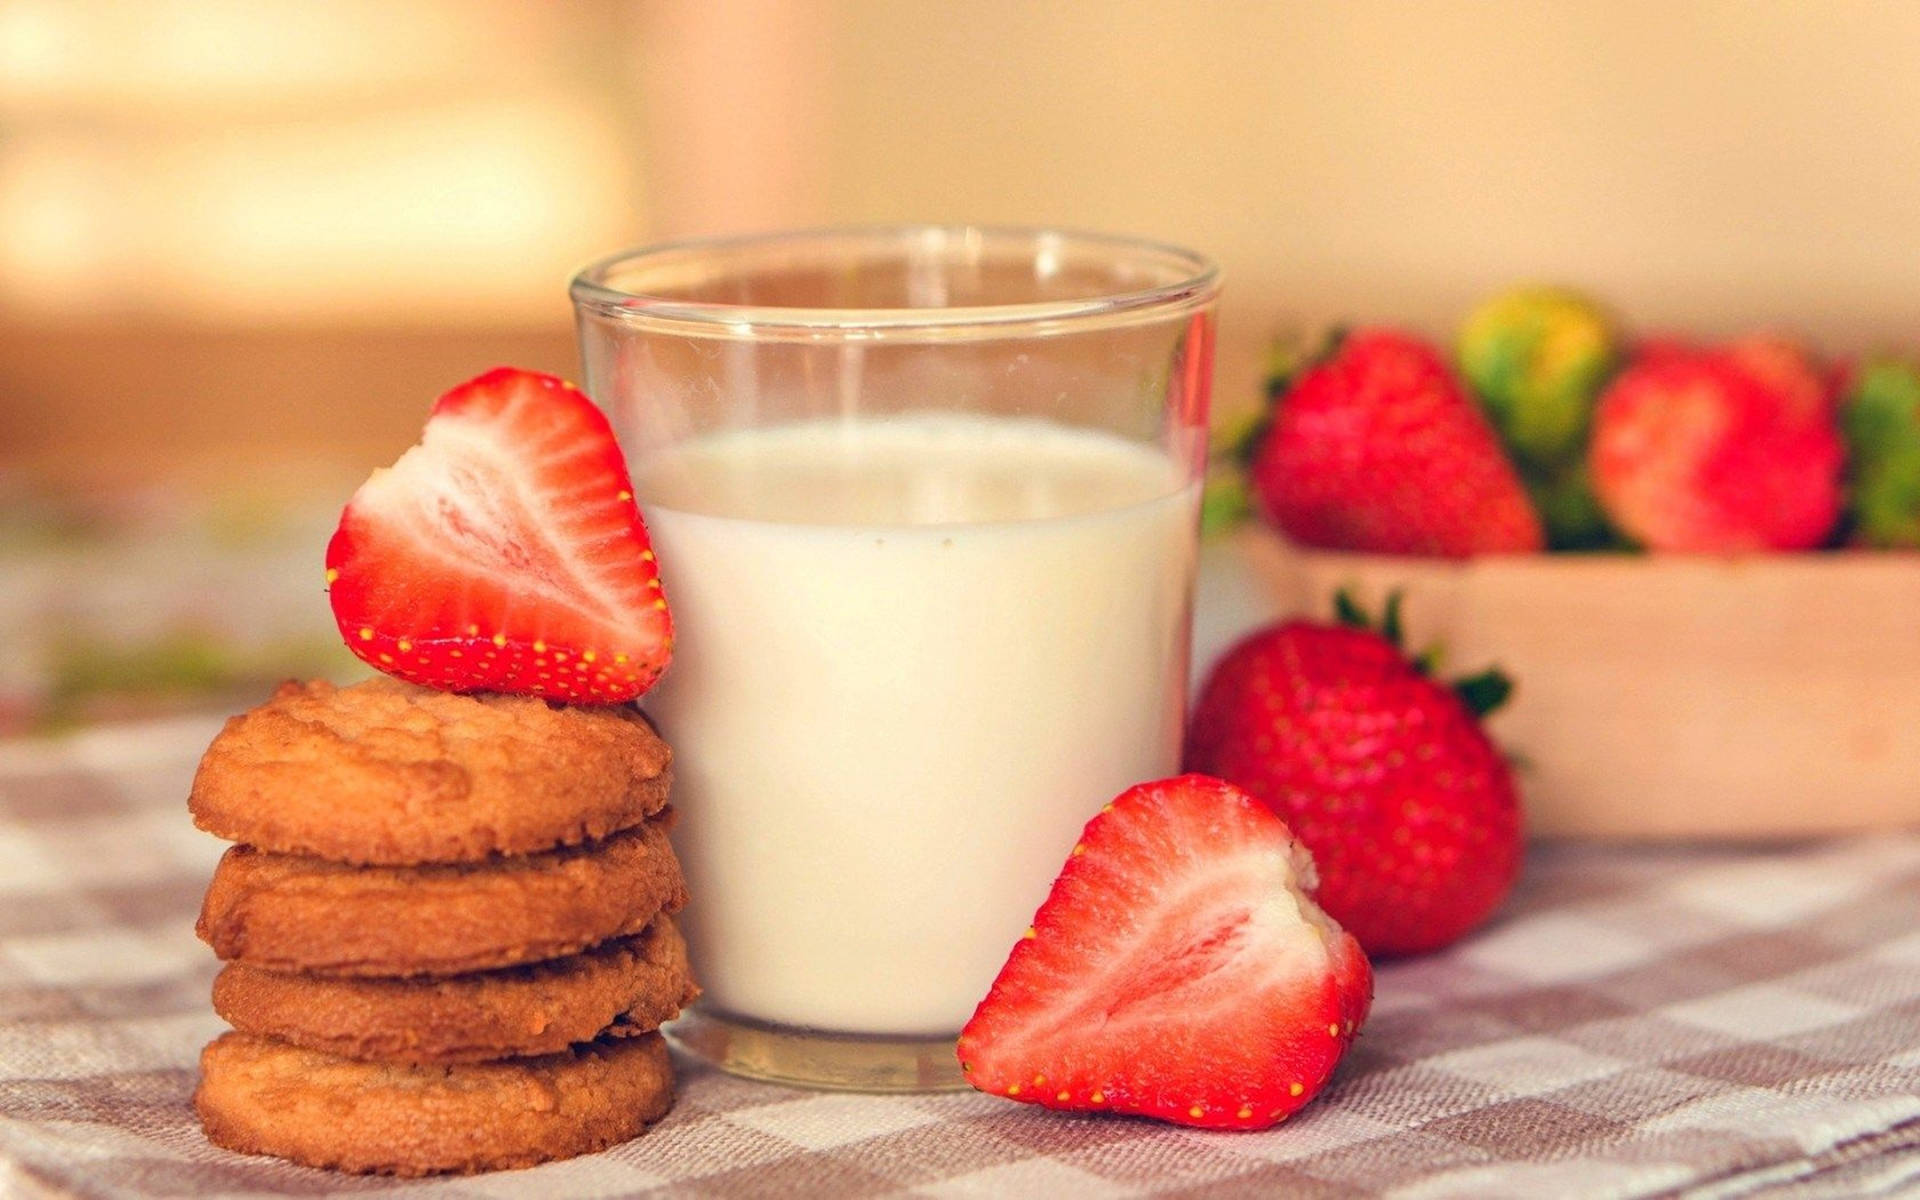 Sidetrack Your Cravings With A Nutritious Combo Of Milk, Cookies, And Strawberries